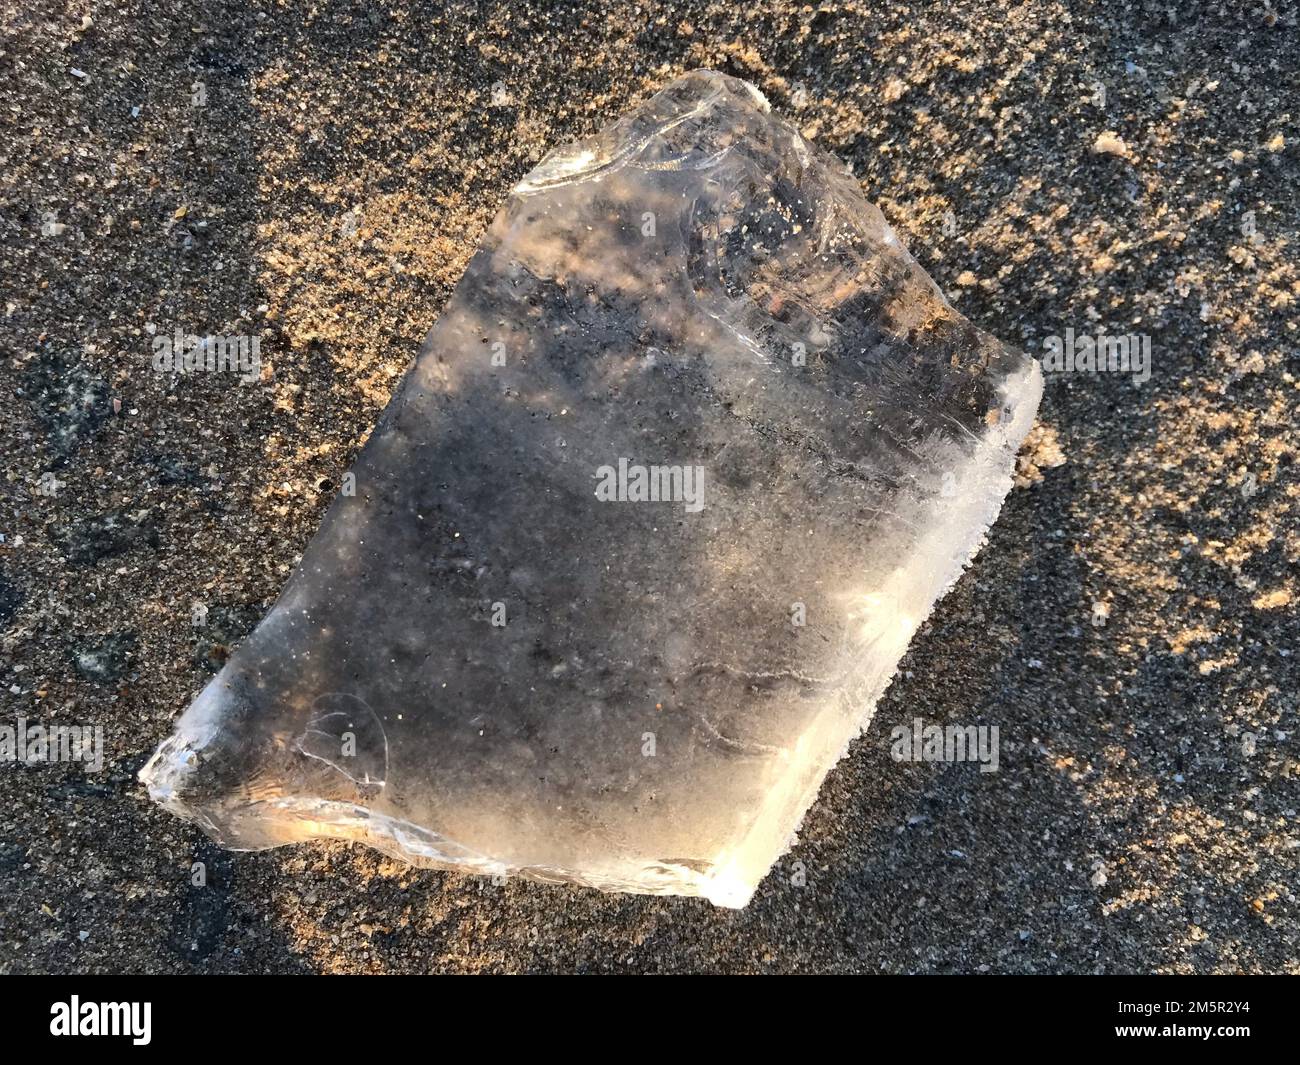 Ice on a beach concept image reflecting issues like climate change, extreme weather events or ideas like contrasts (hot versus cold, summer v winter). Stock Photo